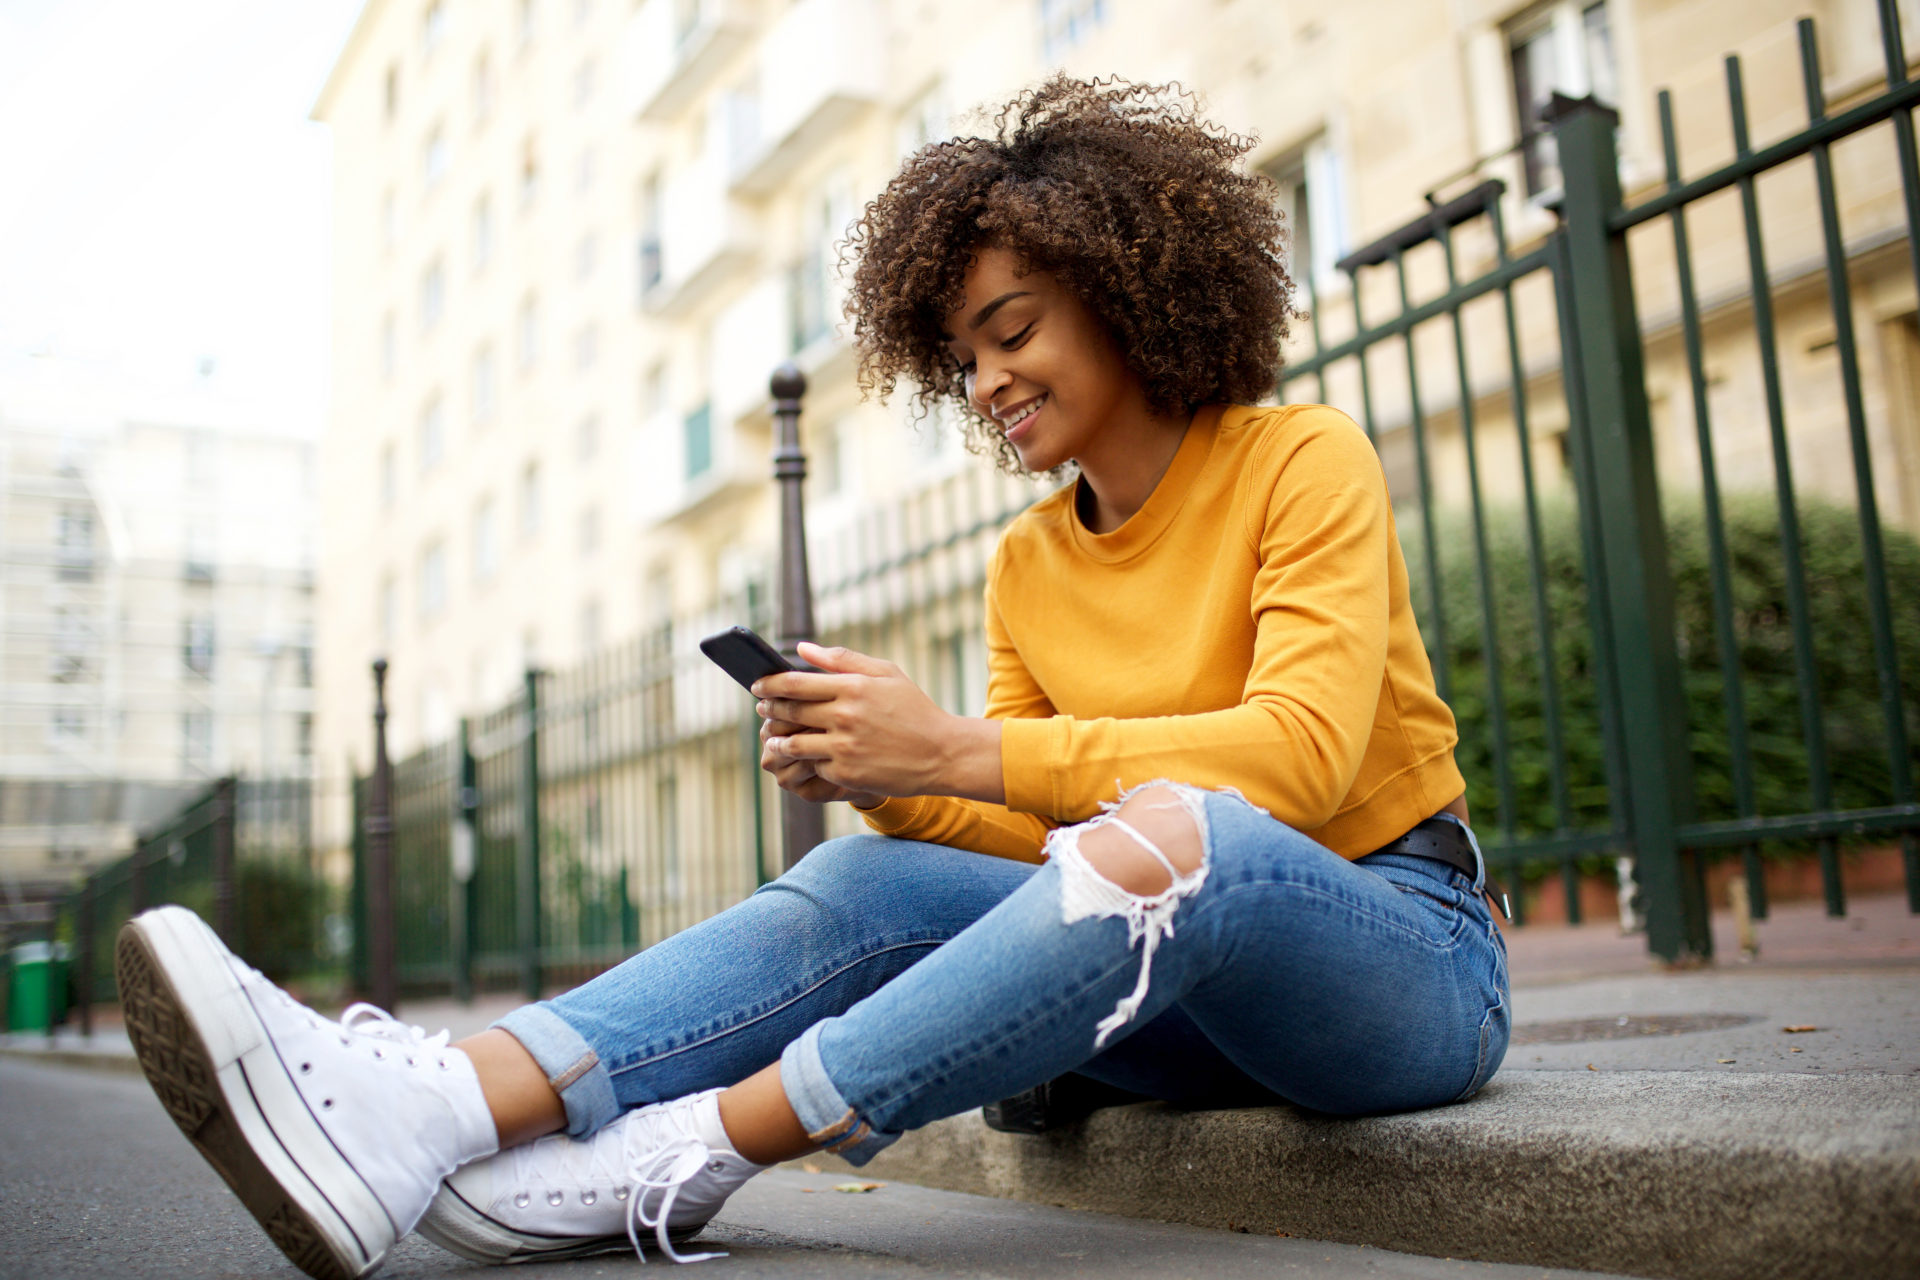 young woman sitting outside on street using her phone